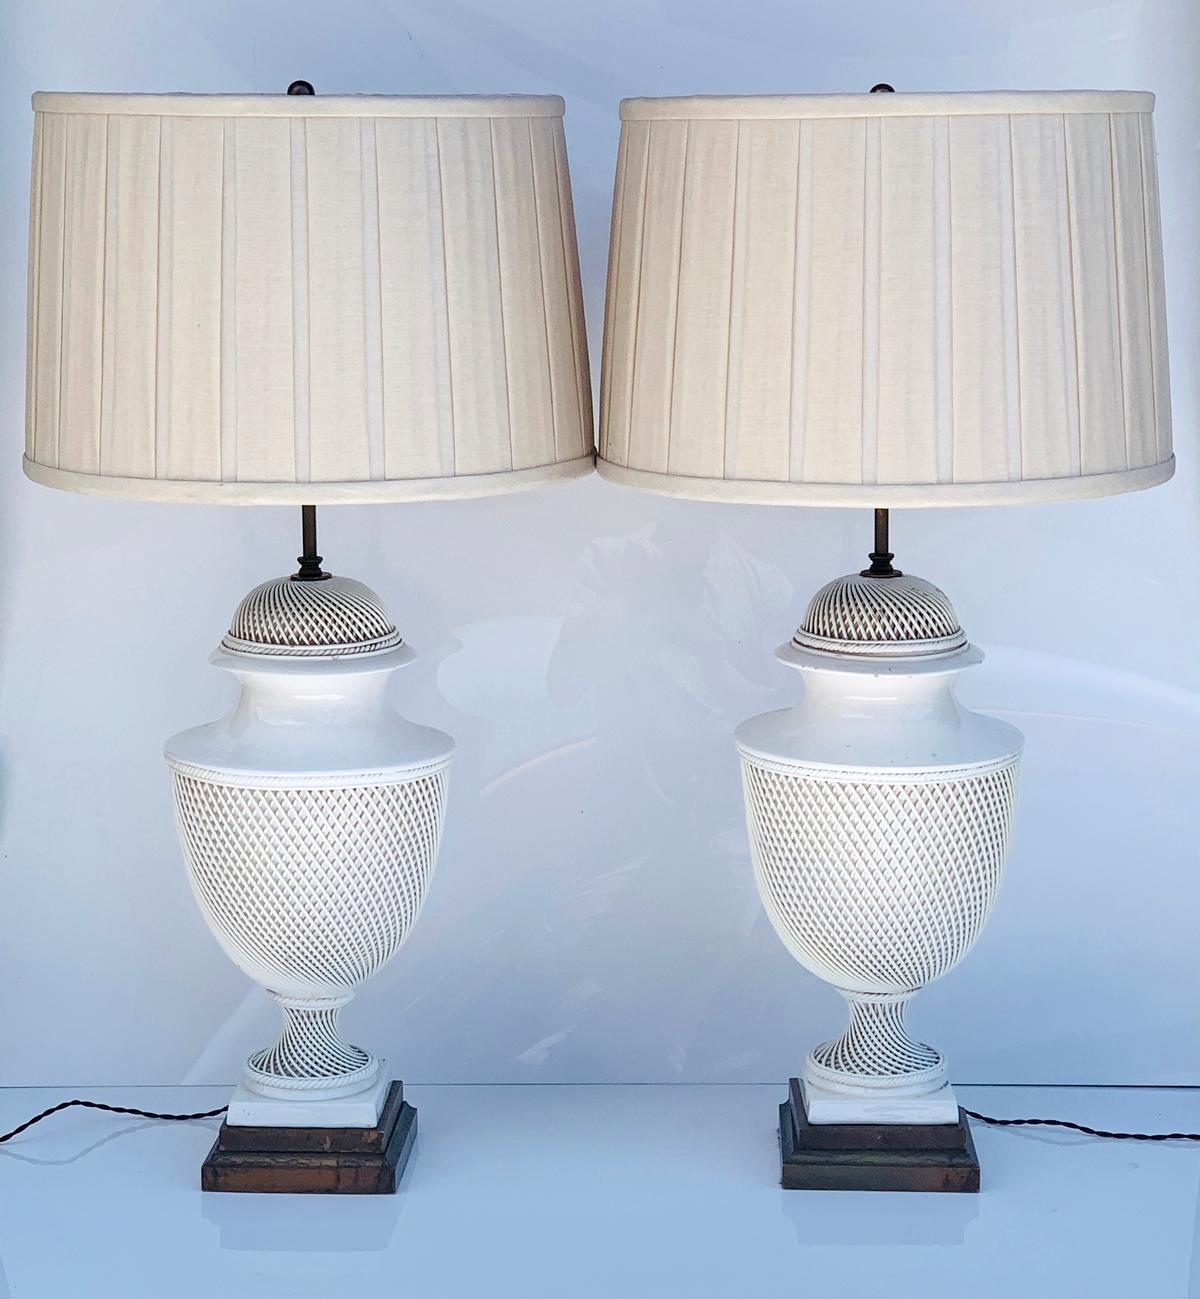 Stunning pair of elliptical braided lattice ceramic Italian lamps with a brass and wood base.

The lamps are beautifully crafted, the shades are in good condition and perfect to be used.

The brass rod holding the shades is height adjustable and